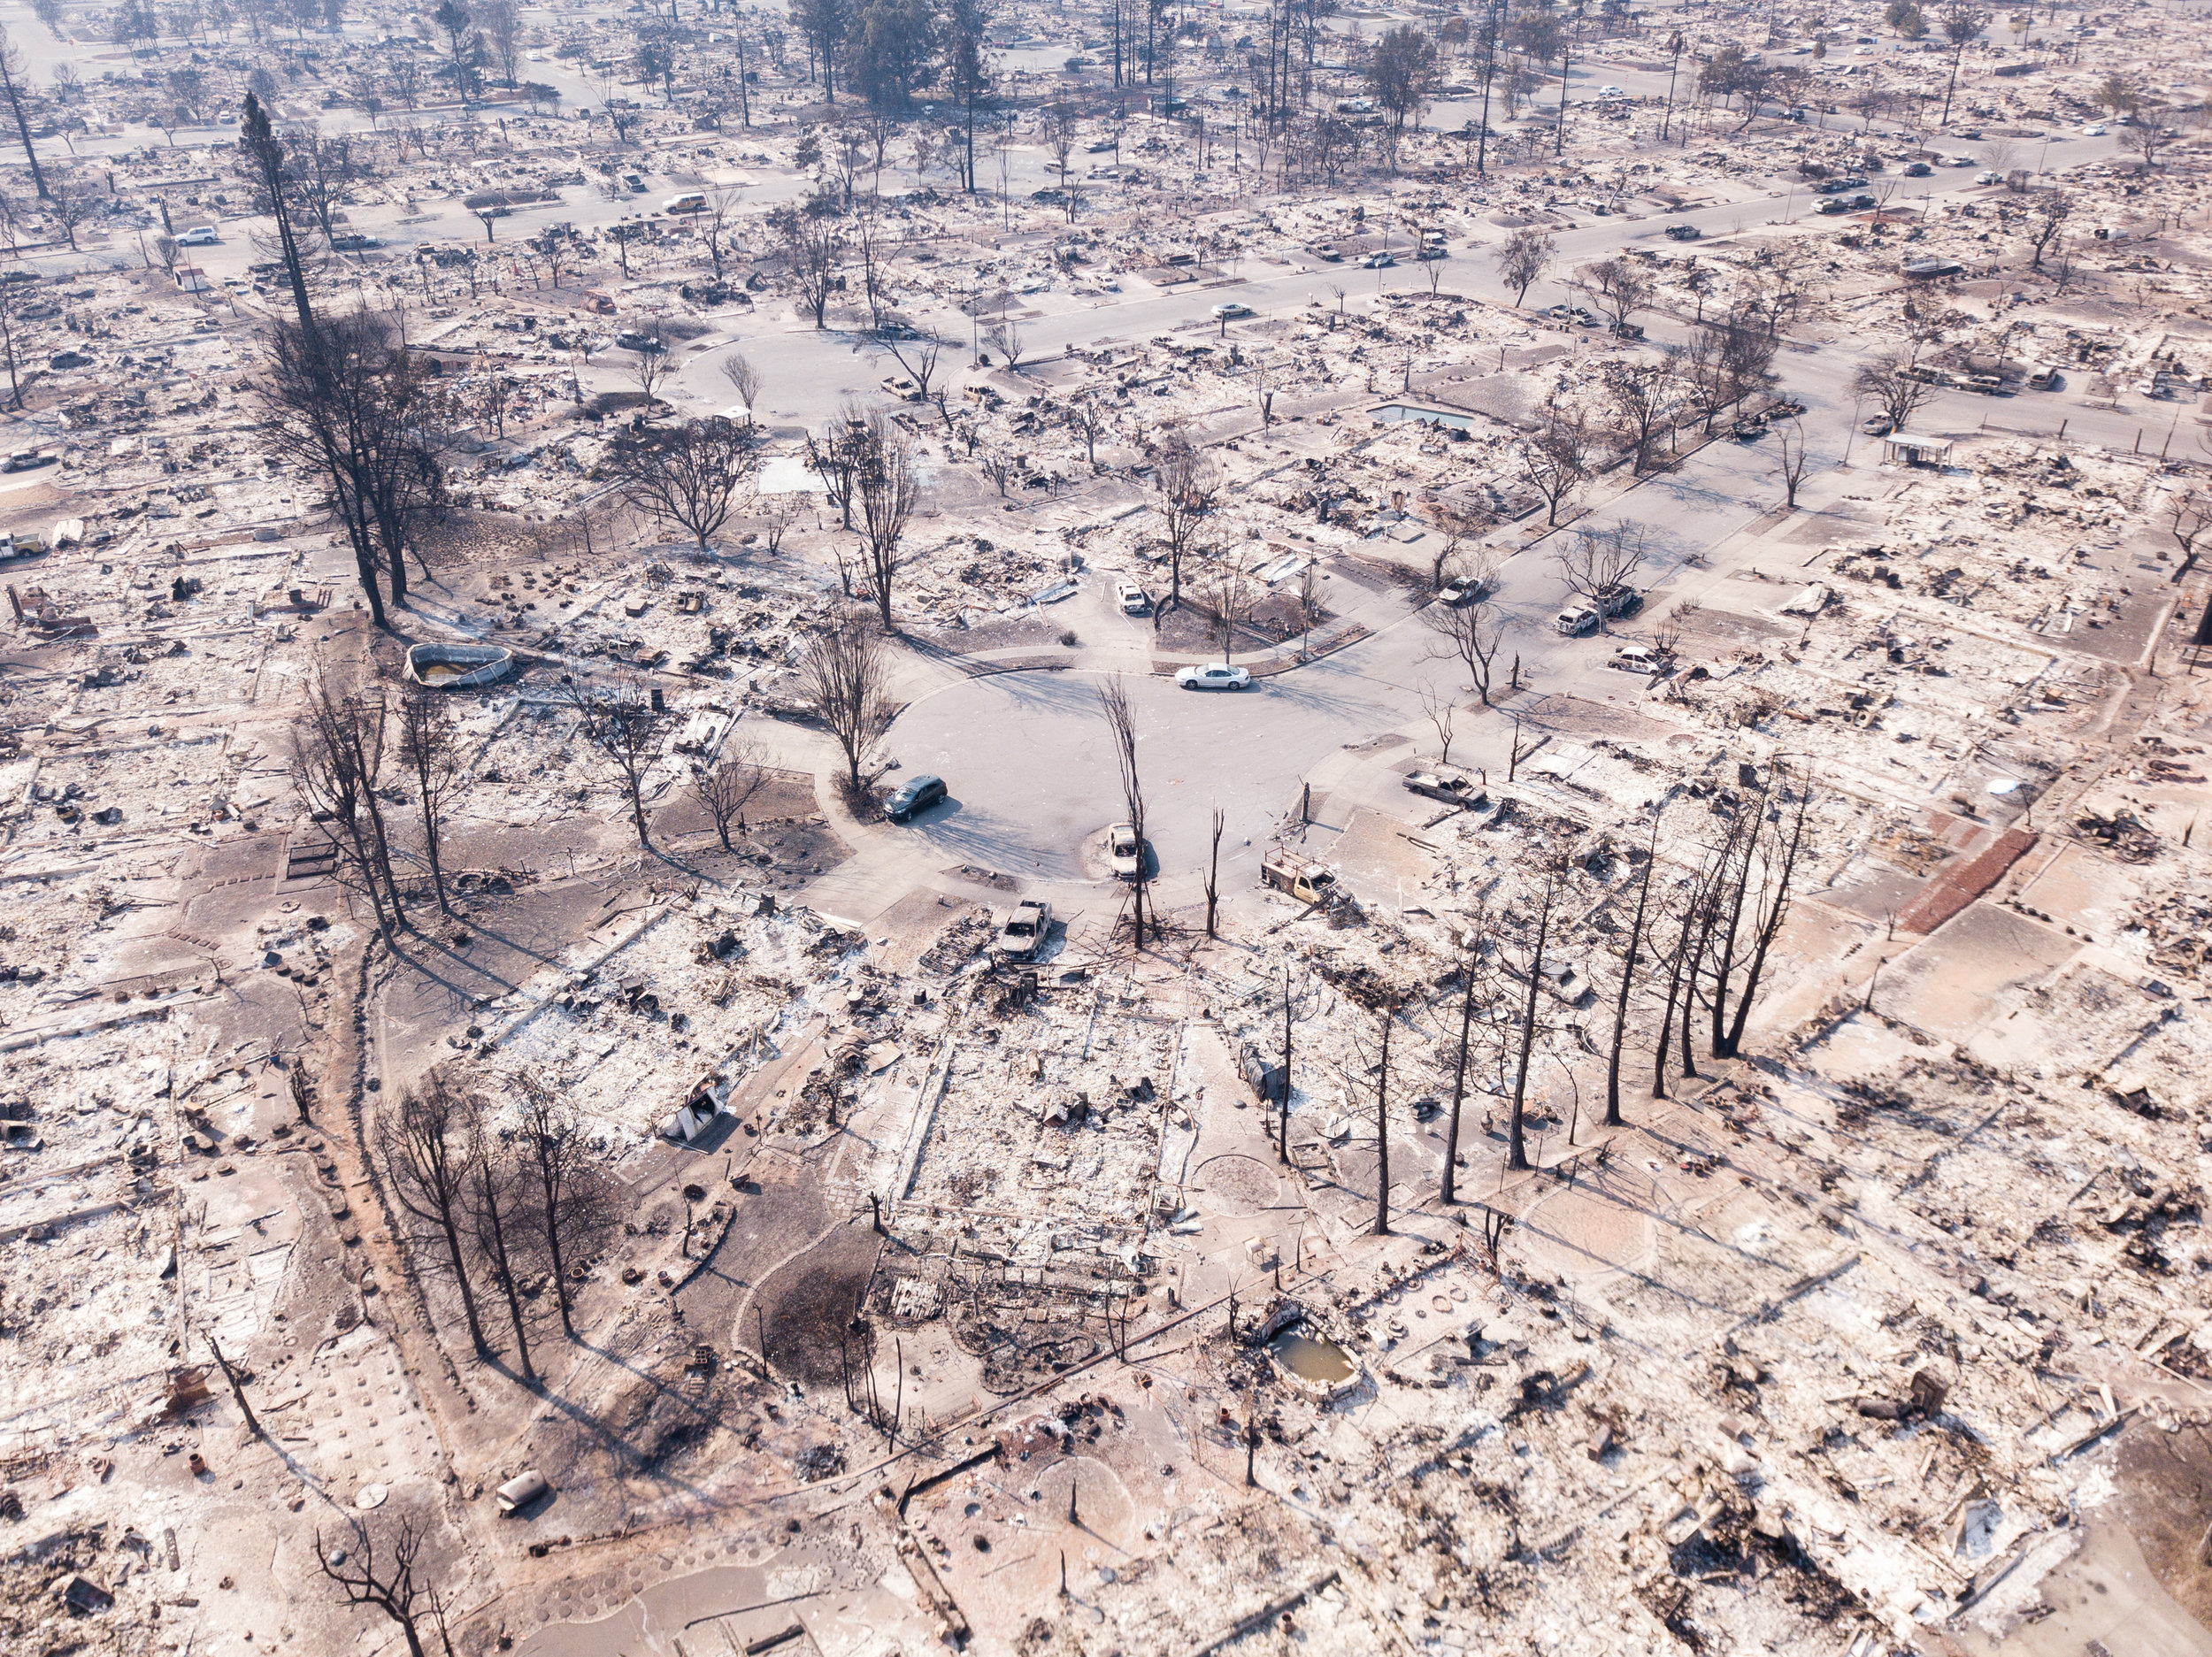  The remains of homes in the Coffey Park neighborhood are seen from the air in Santa Rosa, California 